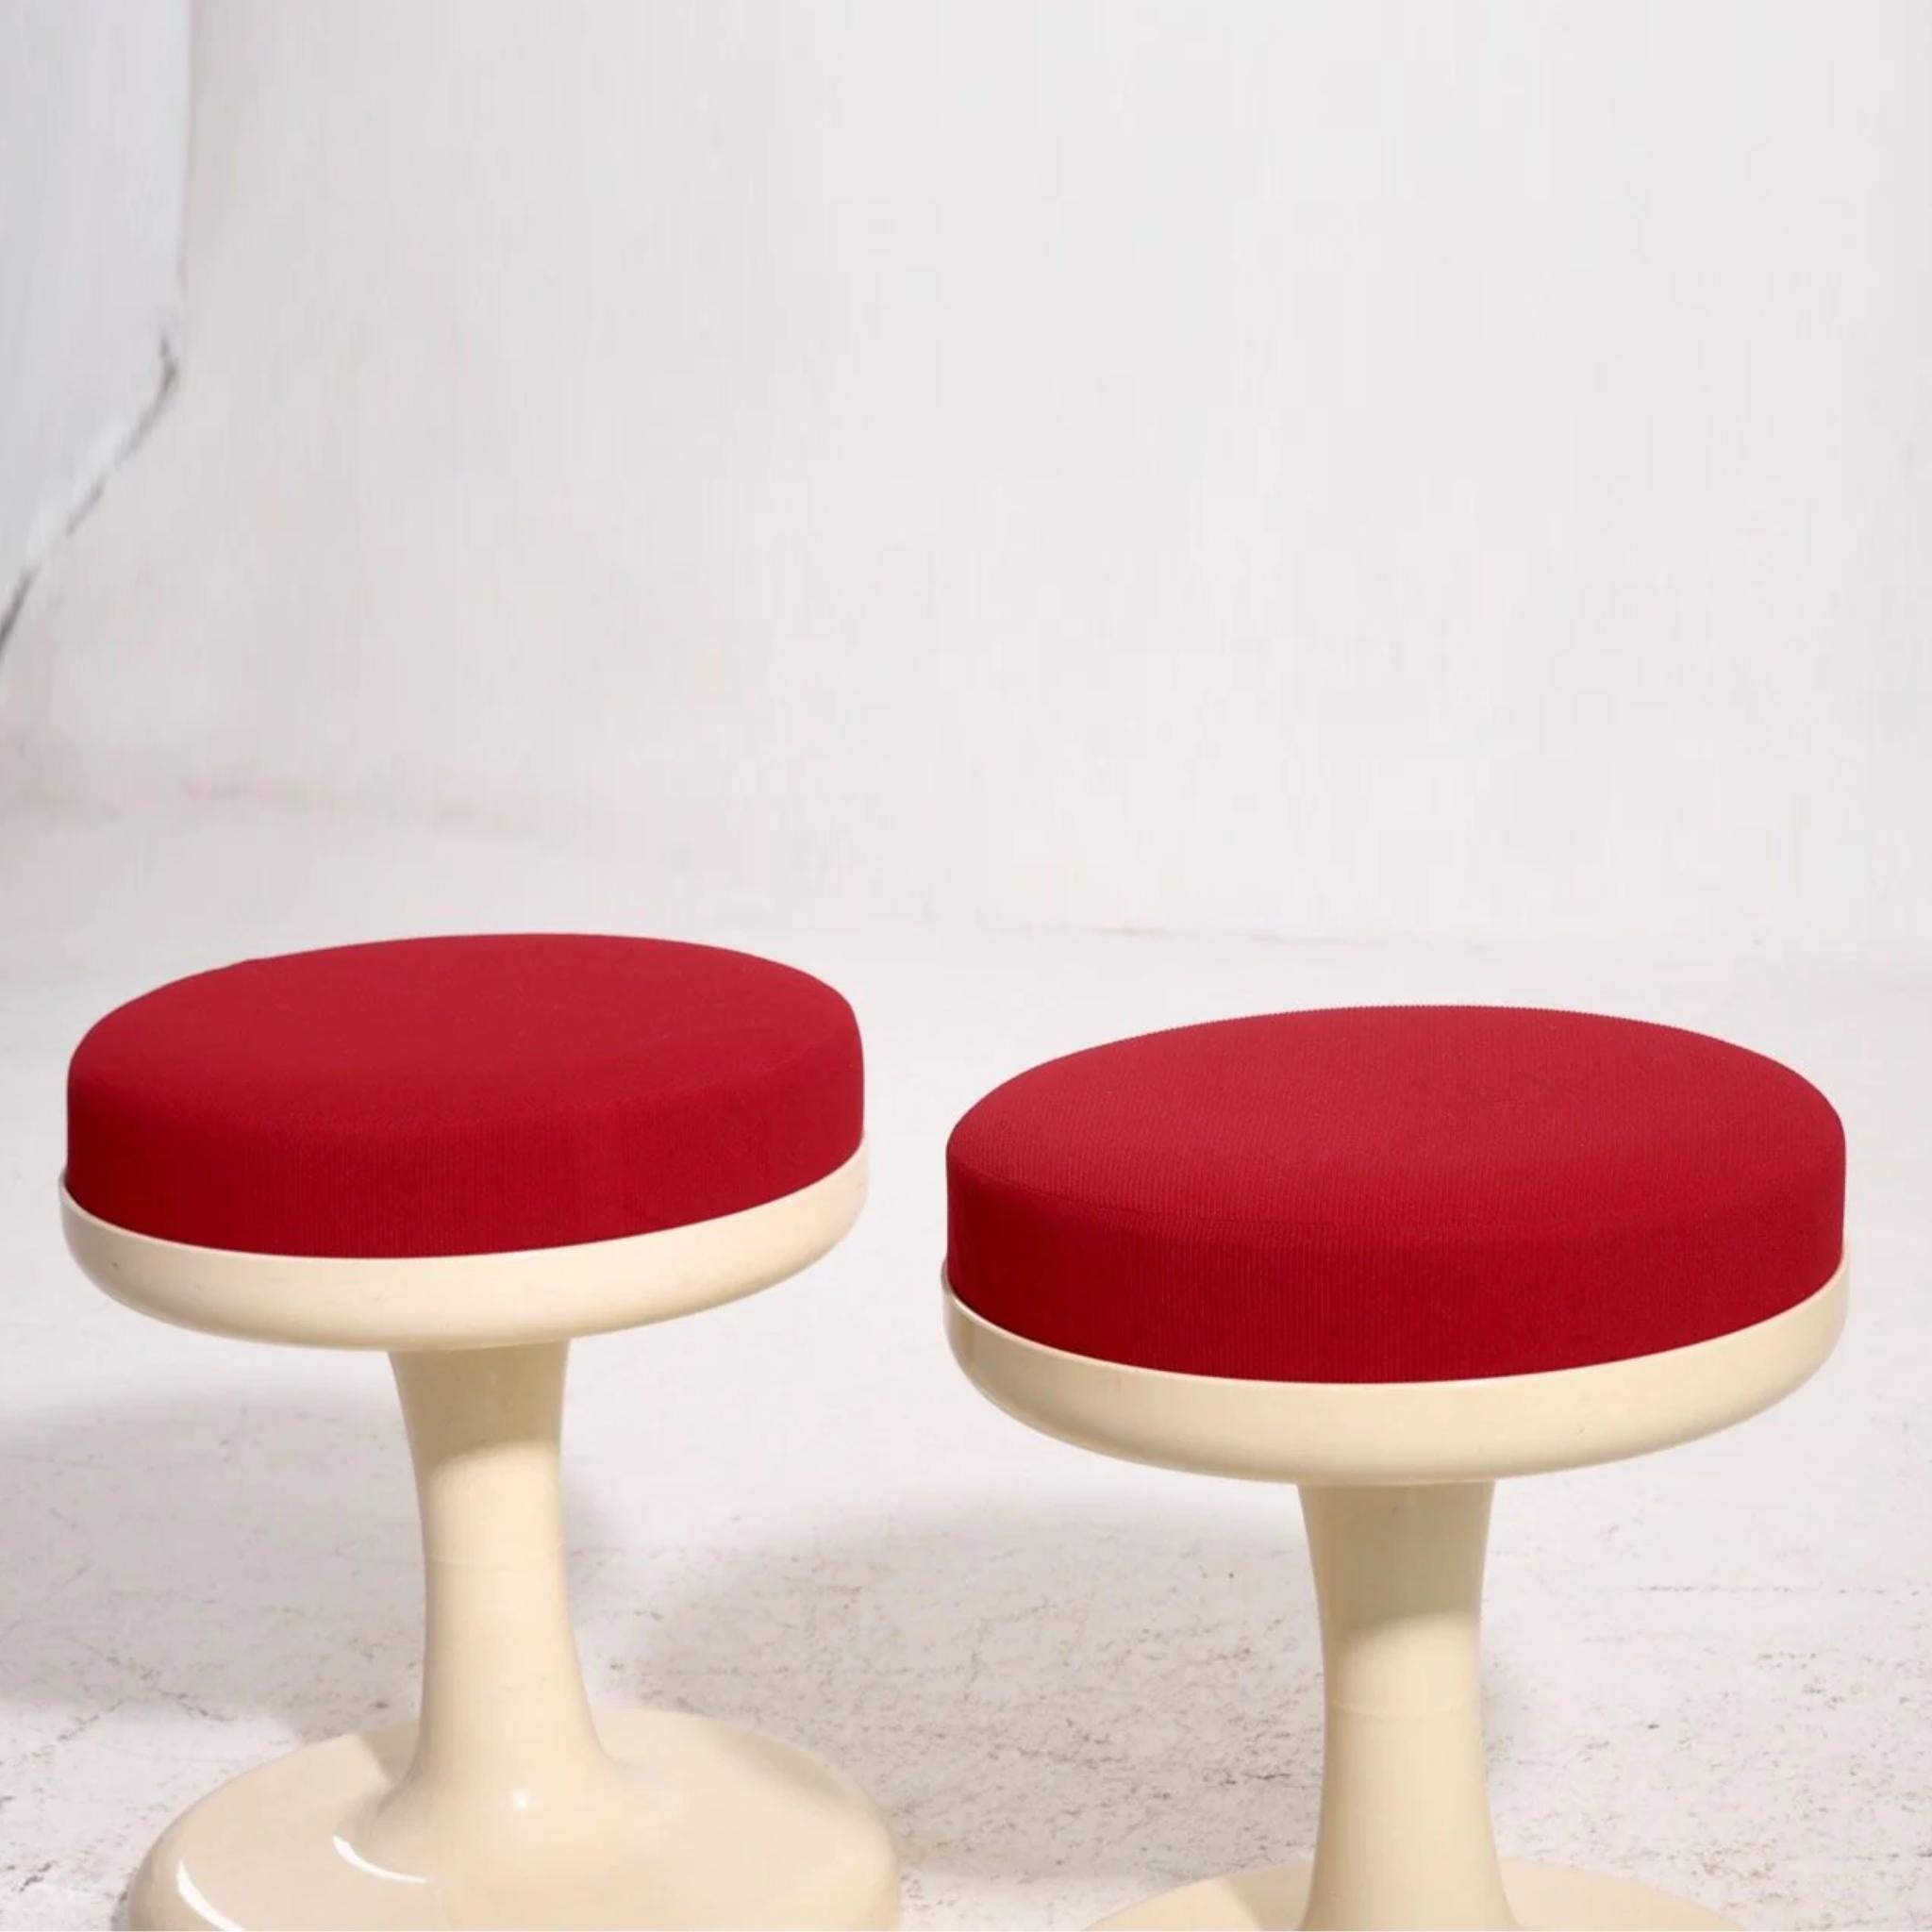 Rare pair of Scandinavian modern stools with red fabric upholstery, 1960s.